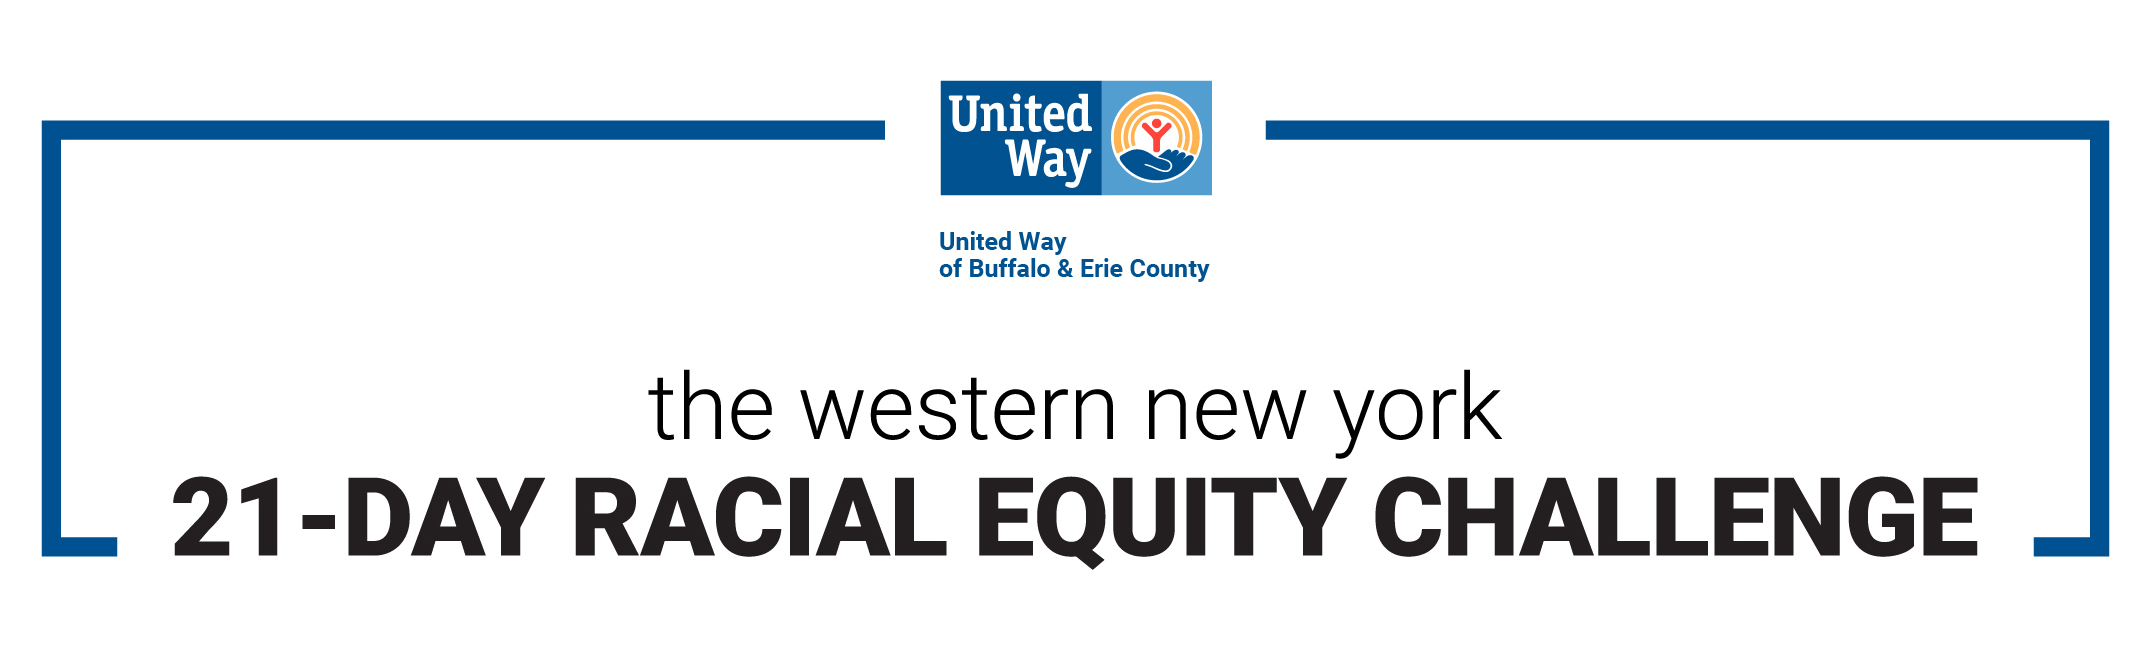 The Western New York 21-Day Racial Equity Challenge Day 1